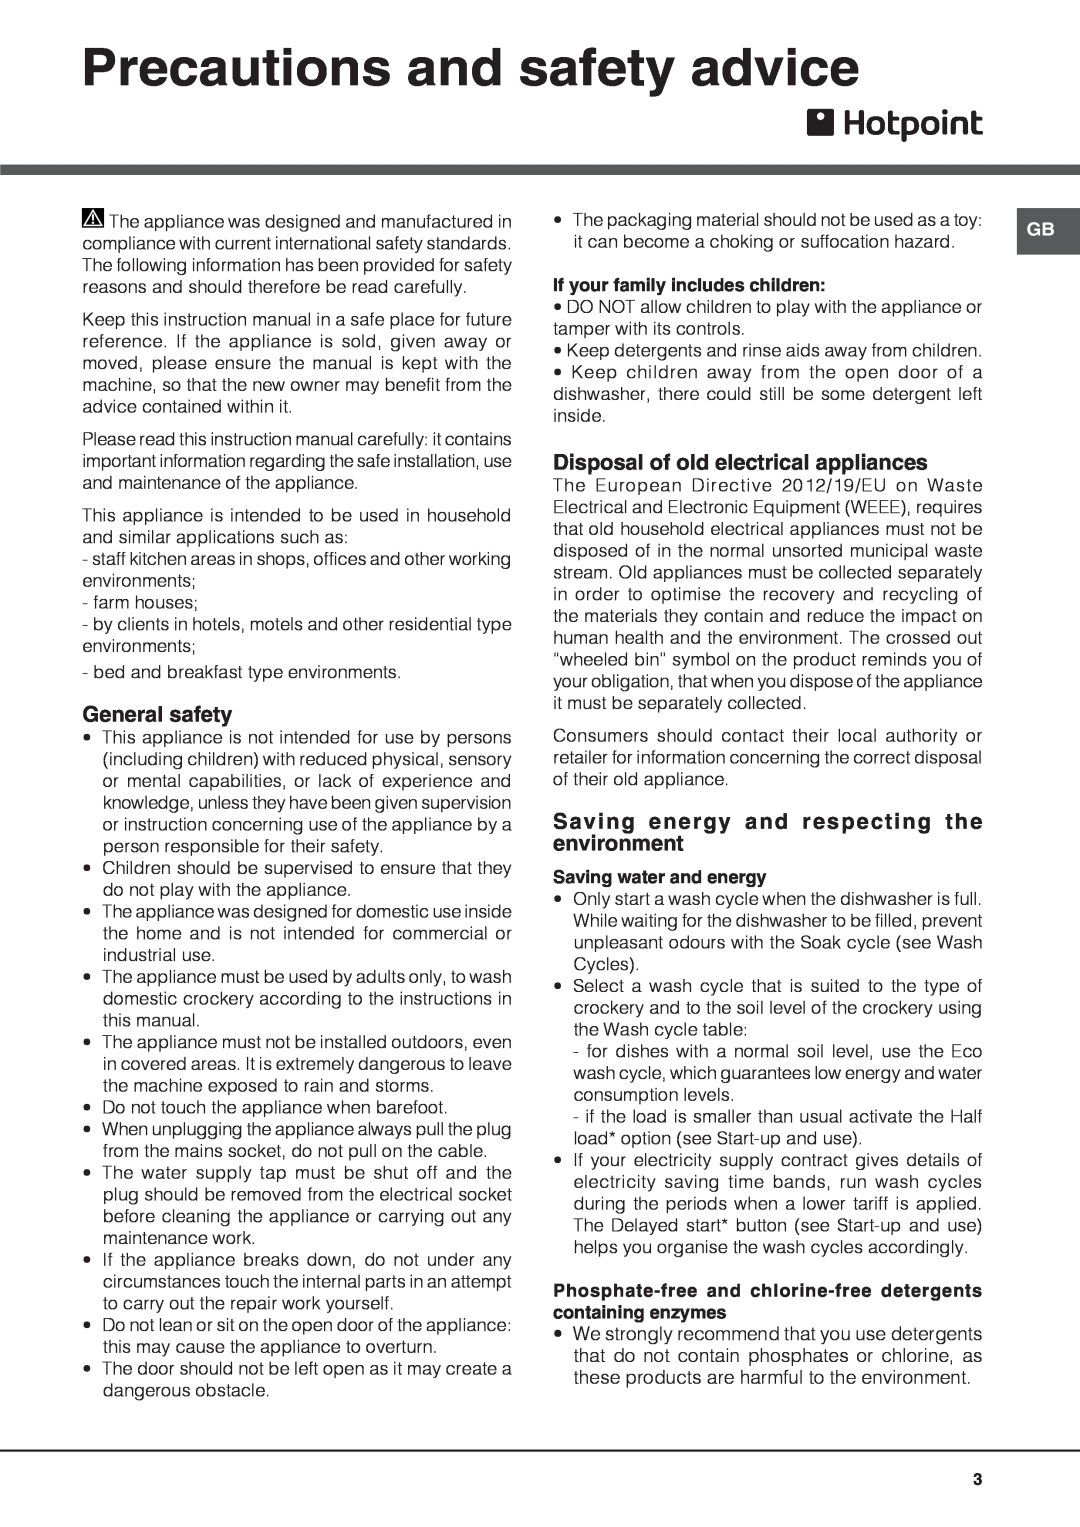 Hotpoint FDFL 11010 manual Precautions and safety advice, General safety, Disposal of old electrical appliances 